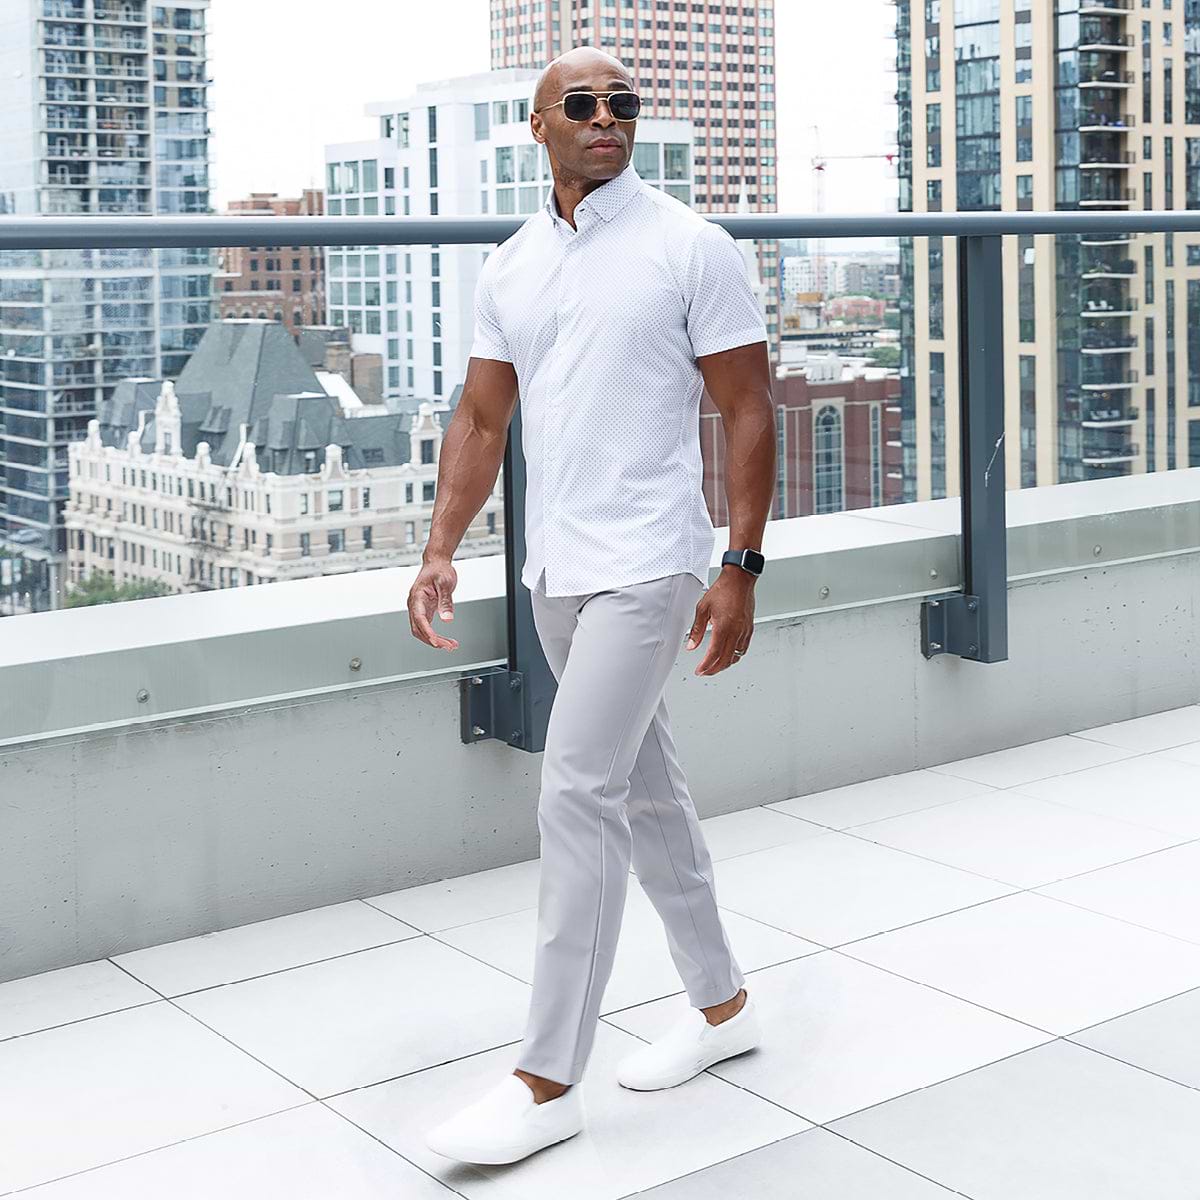 Athletic Fit Dress Shirts vs. Slim Fit - What's The Difference